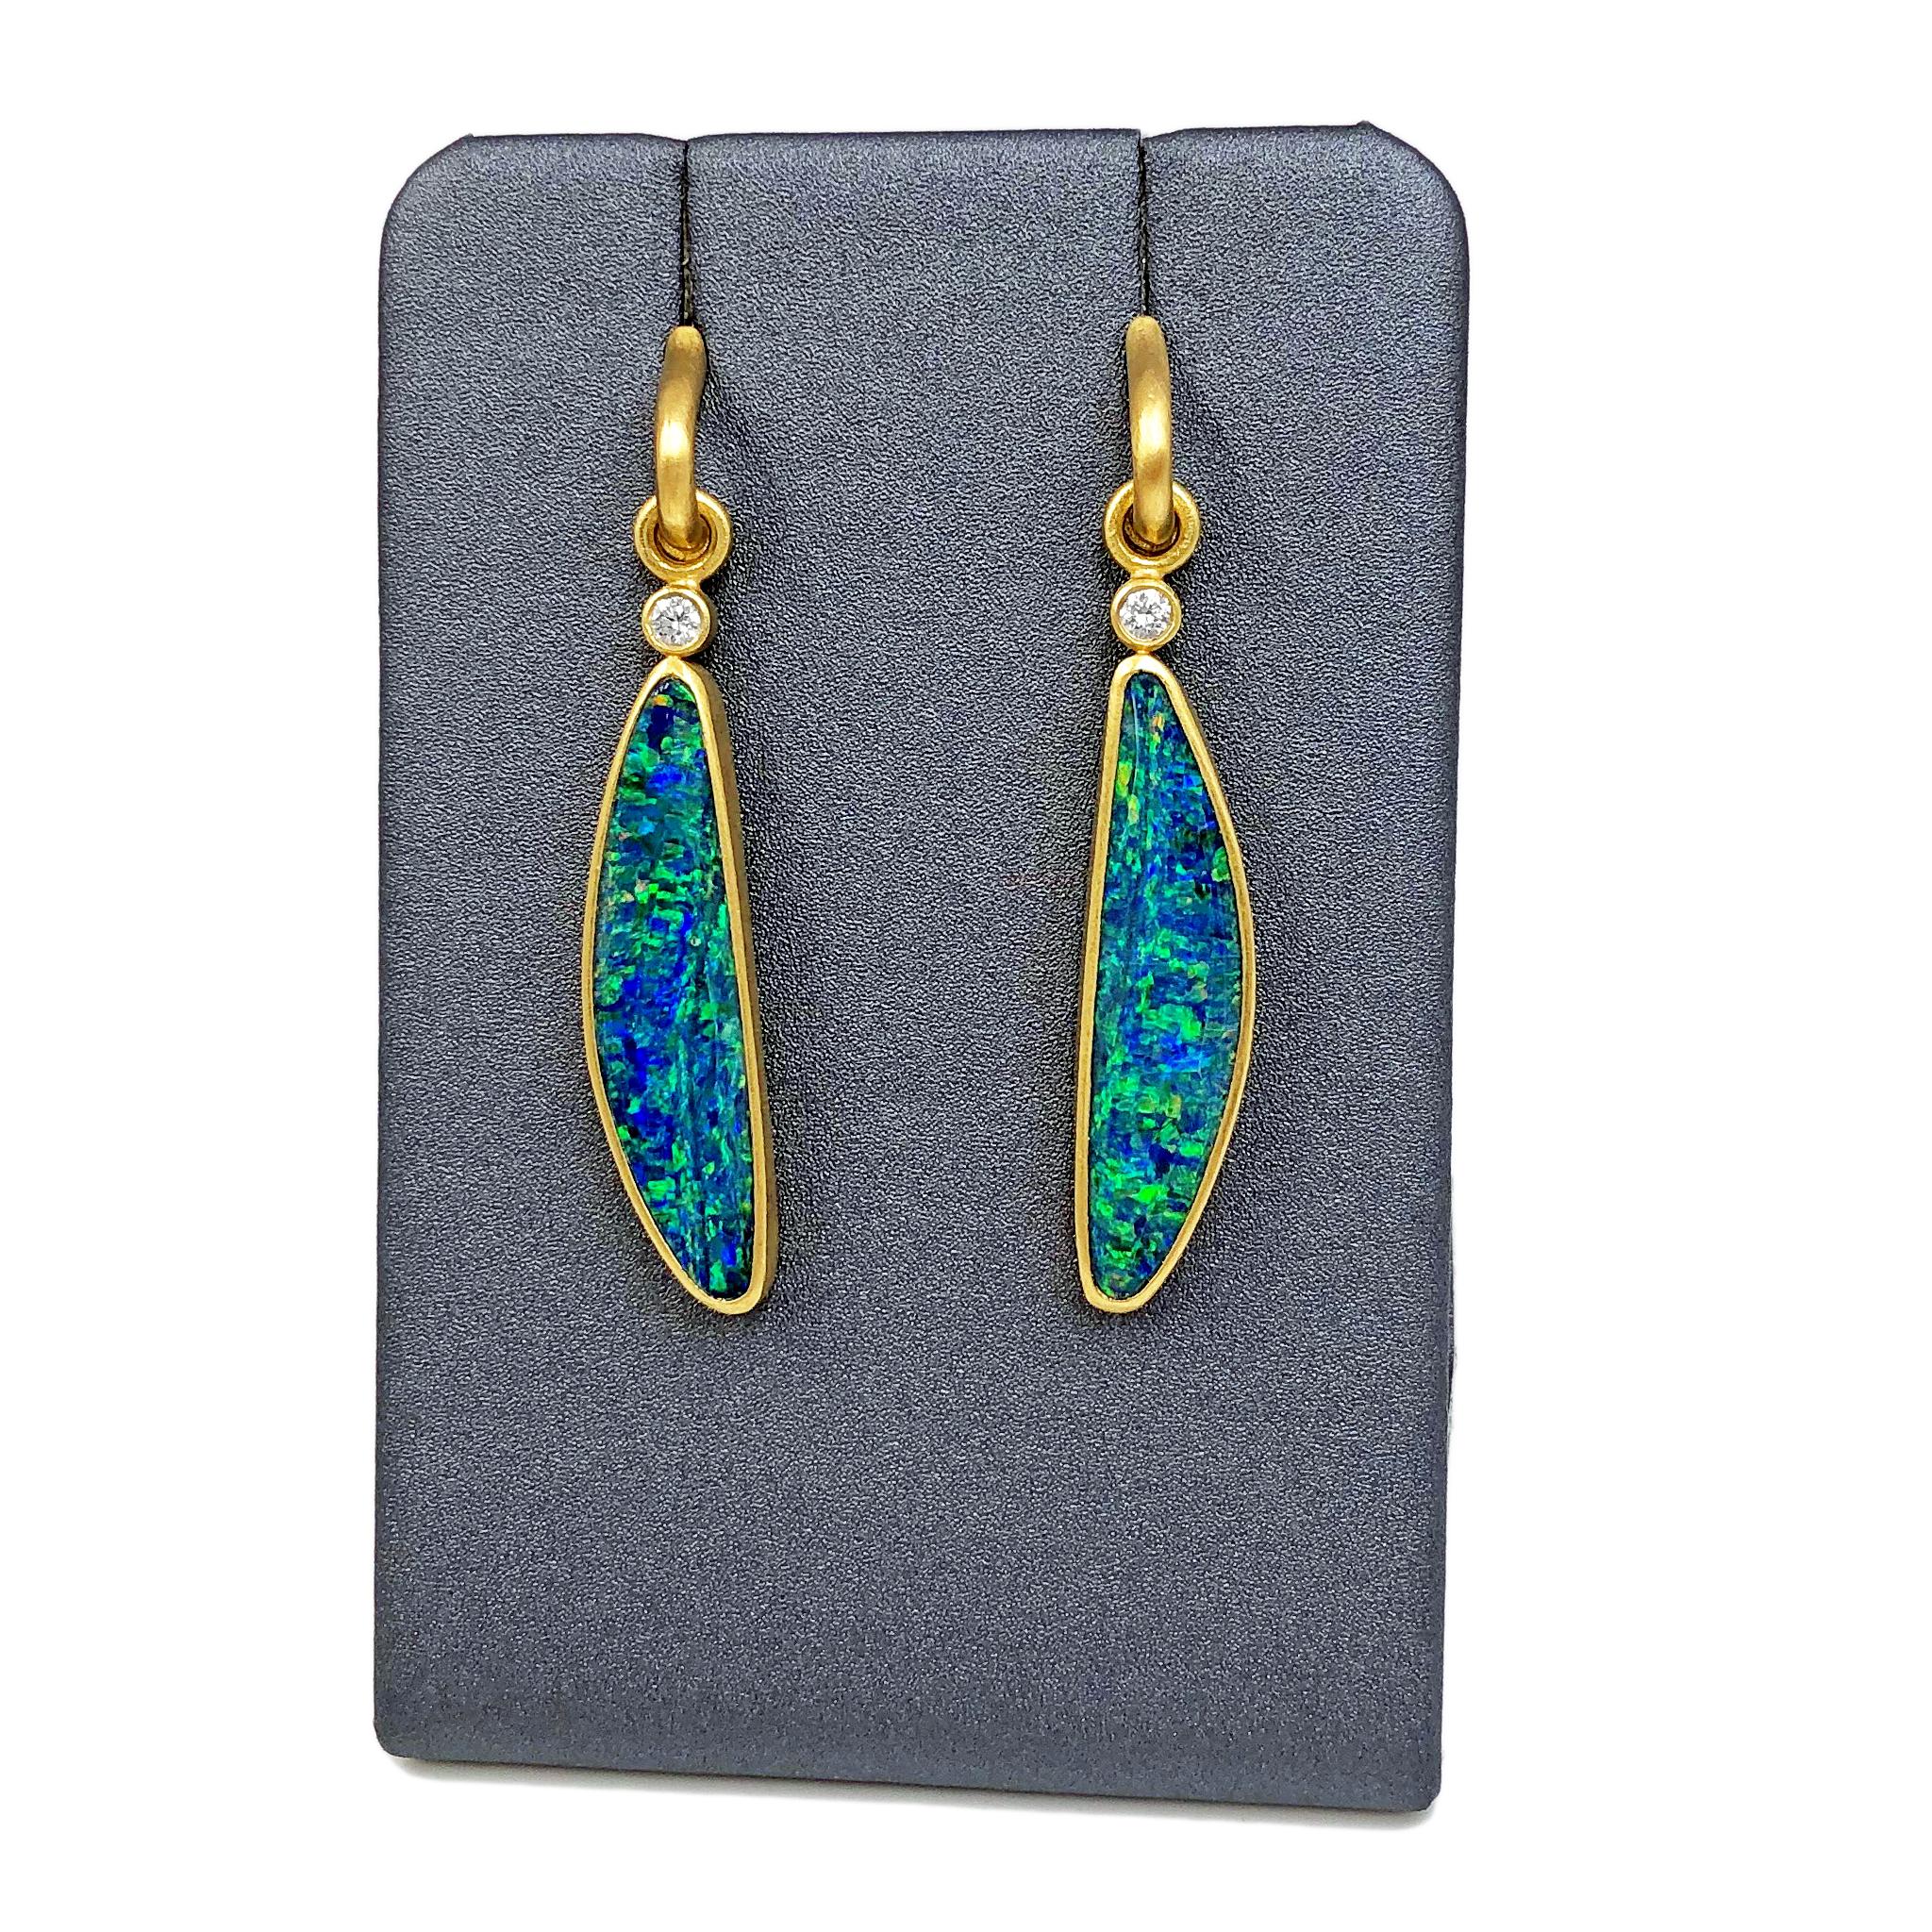 One-of-a-Kind Drop Earrings handcrafted by jewelry maker Denise Betesh in signature matte-finished 22k yellow gold featuring an exceptional matched pair of deep blue opal doublets totaling 9.63 carats showcasing strong neon green flash complemented